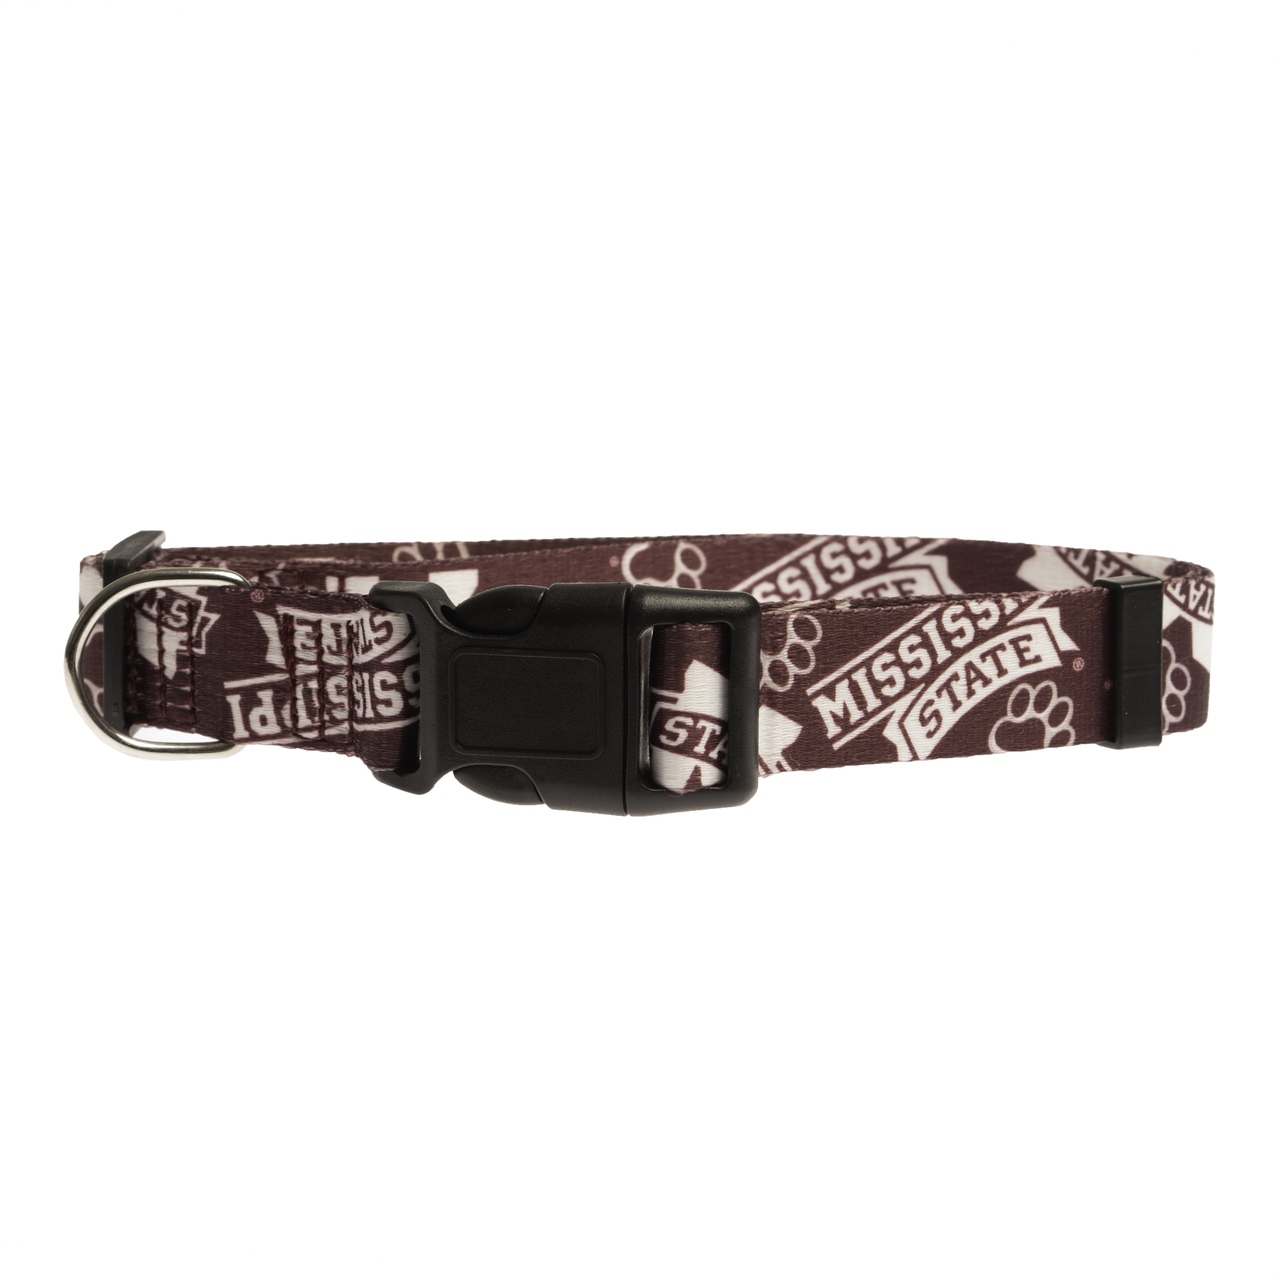 Mississippi State Bulldogs Pet Collar Size S - Special Order